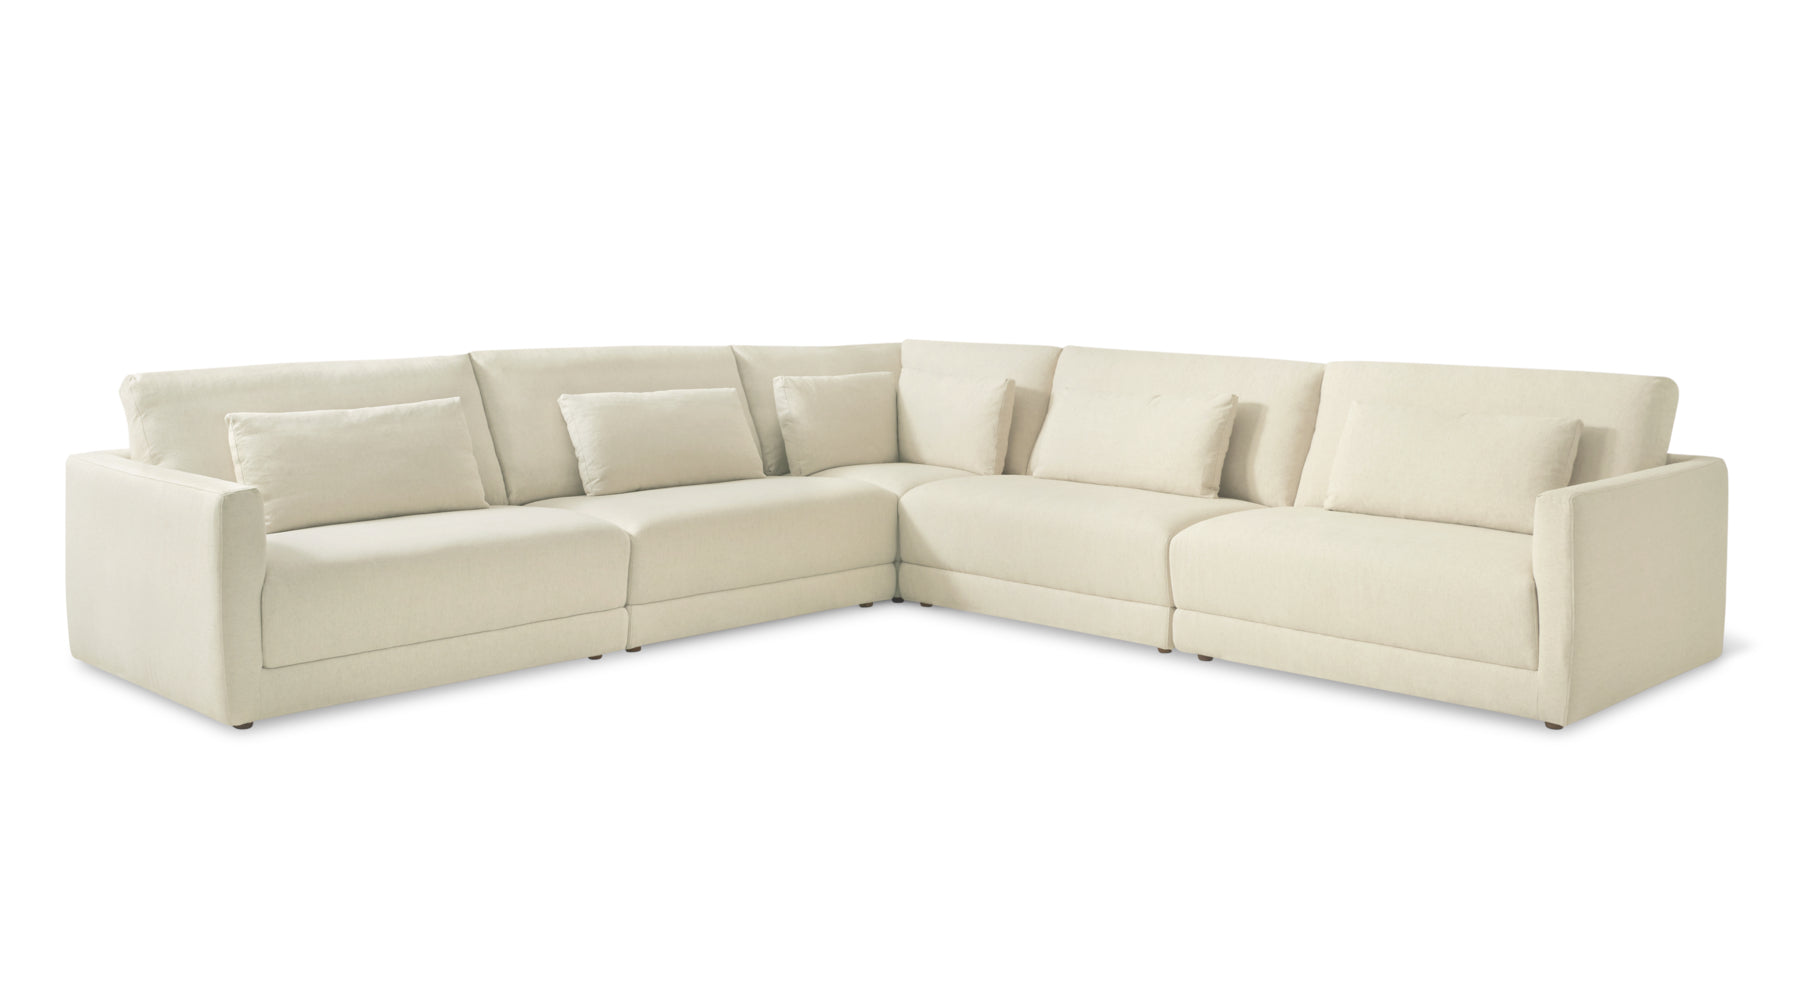 Wind Down 5-Piece Modular Sectional Closed, Beach - Image 2